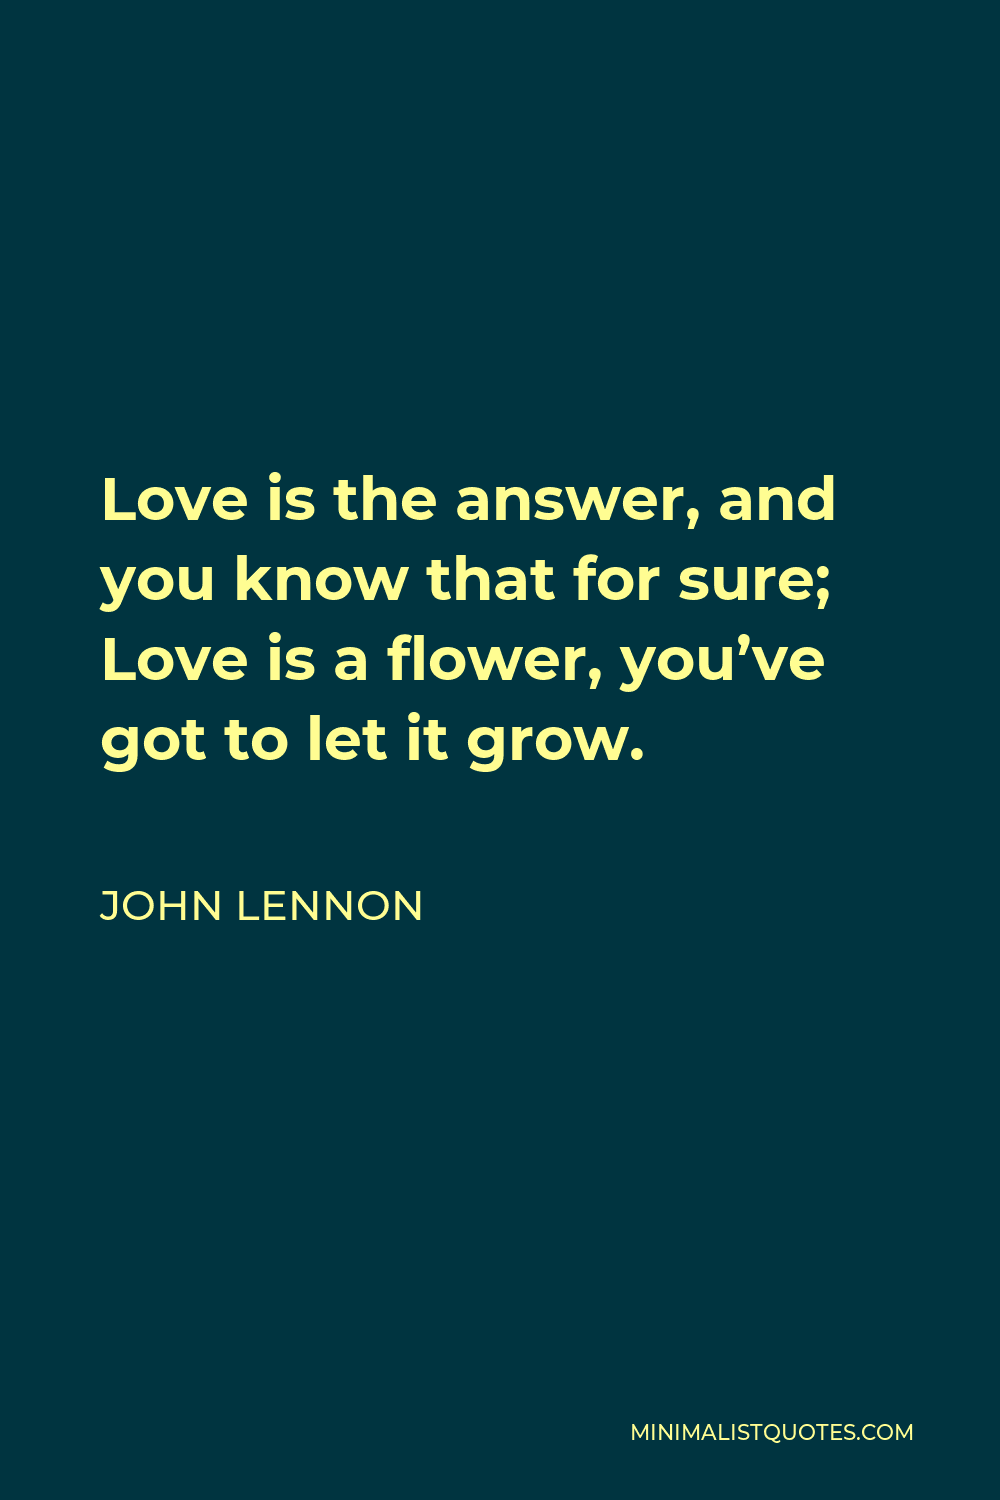 John Lennon Quote - Love is the answer, and you know that for sure; Love is a flower, you’ve got to let it grow.